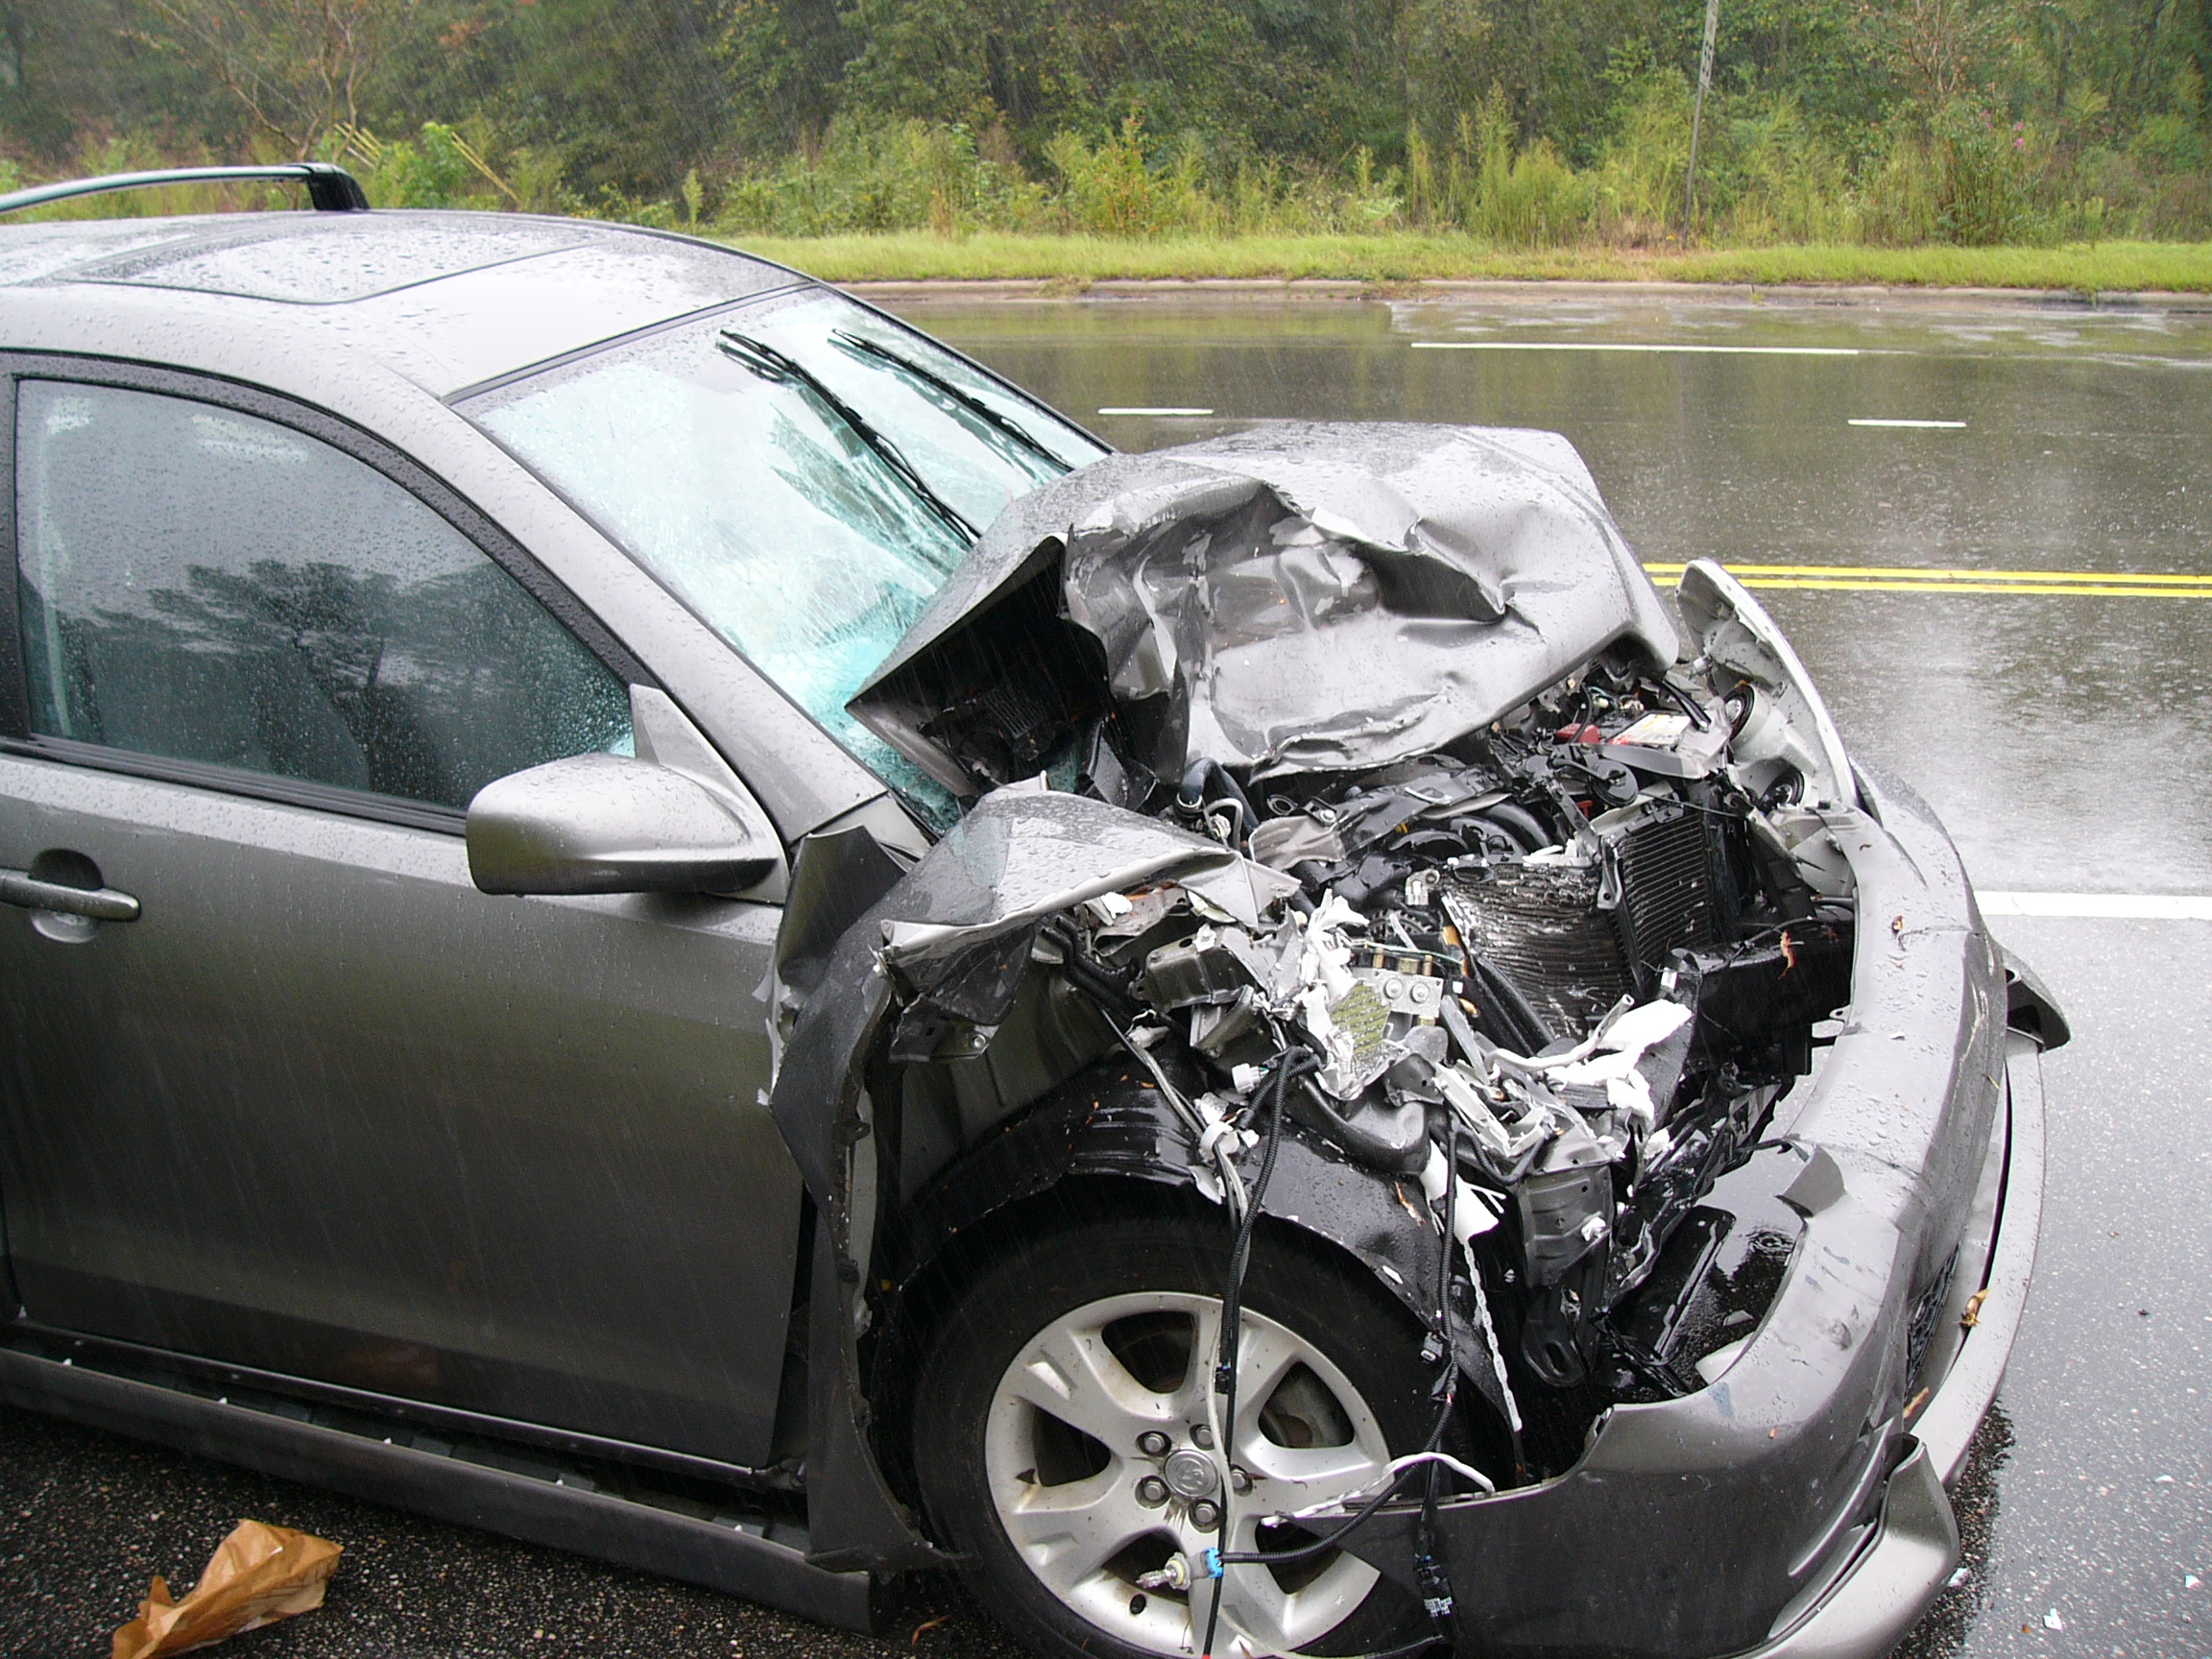 Injured In A Car Accident?